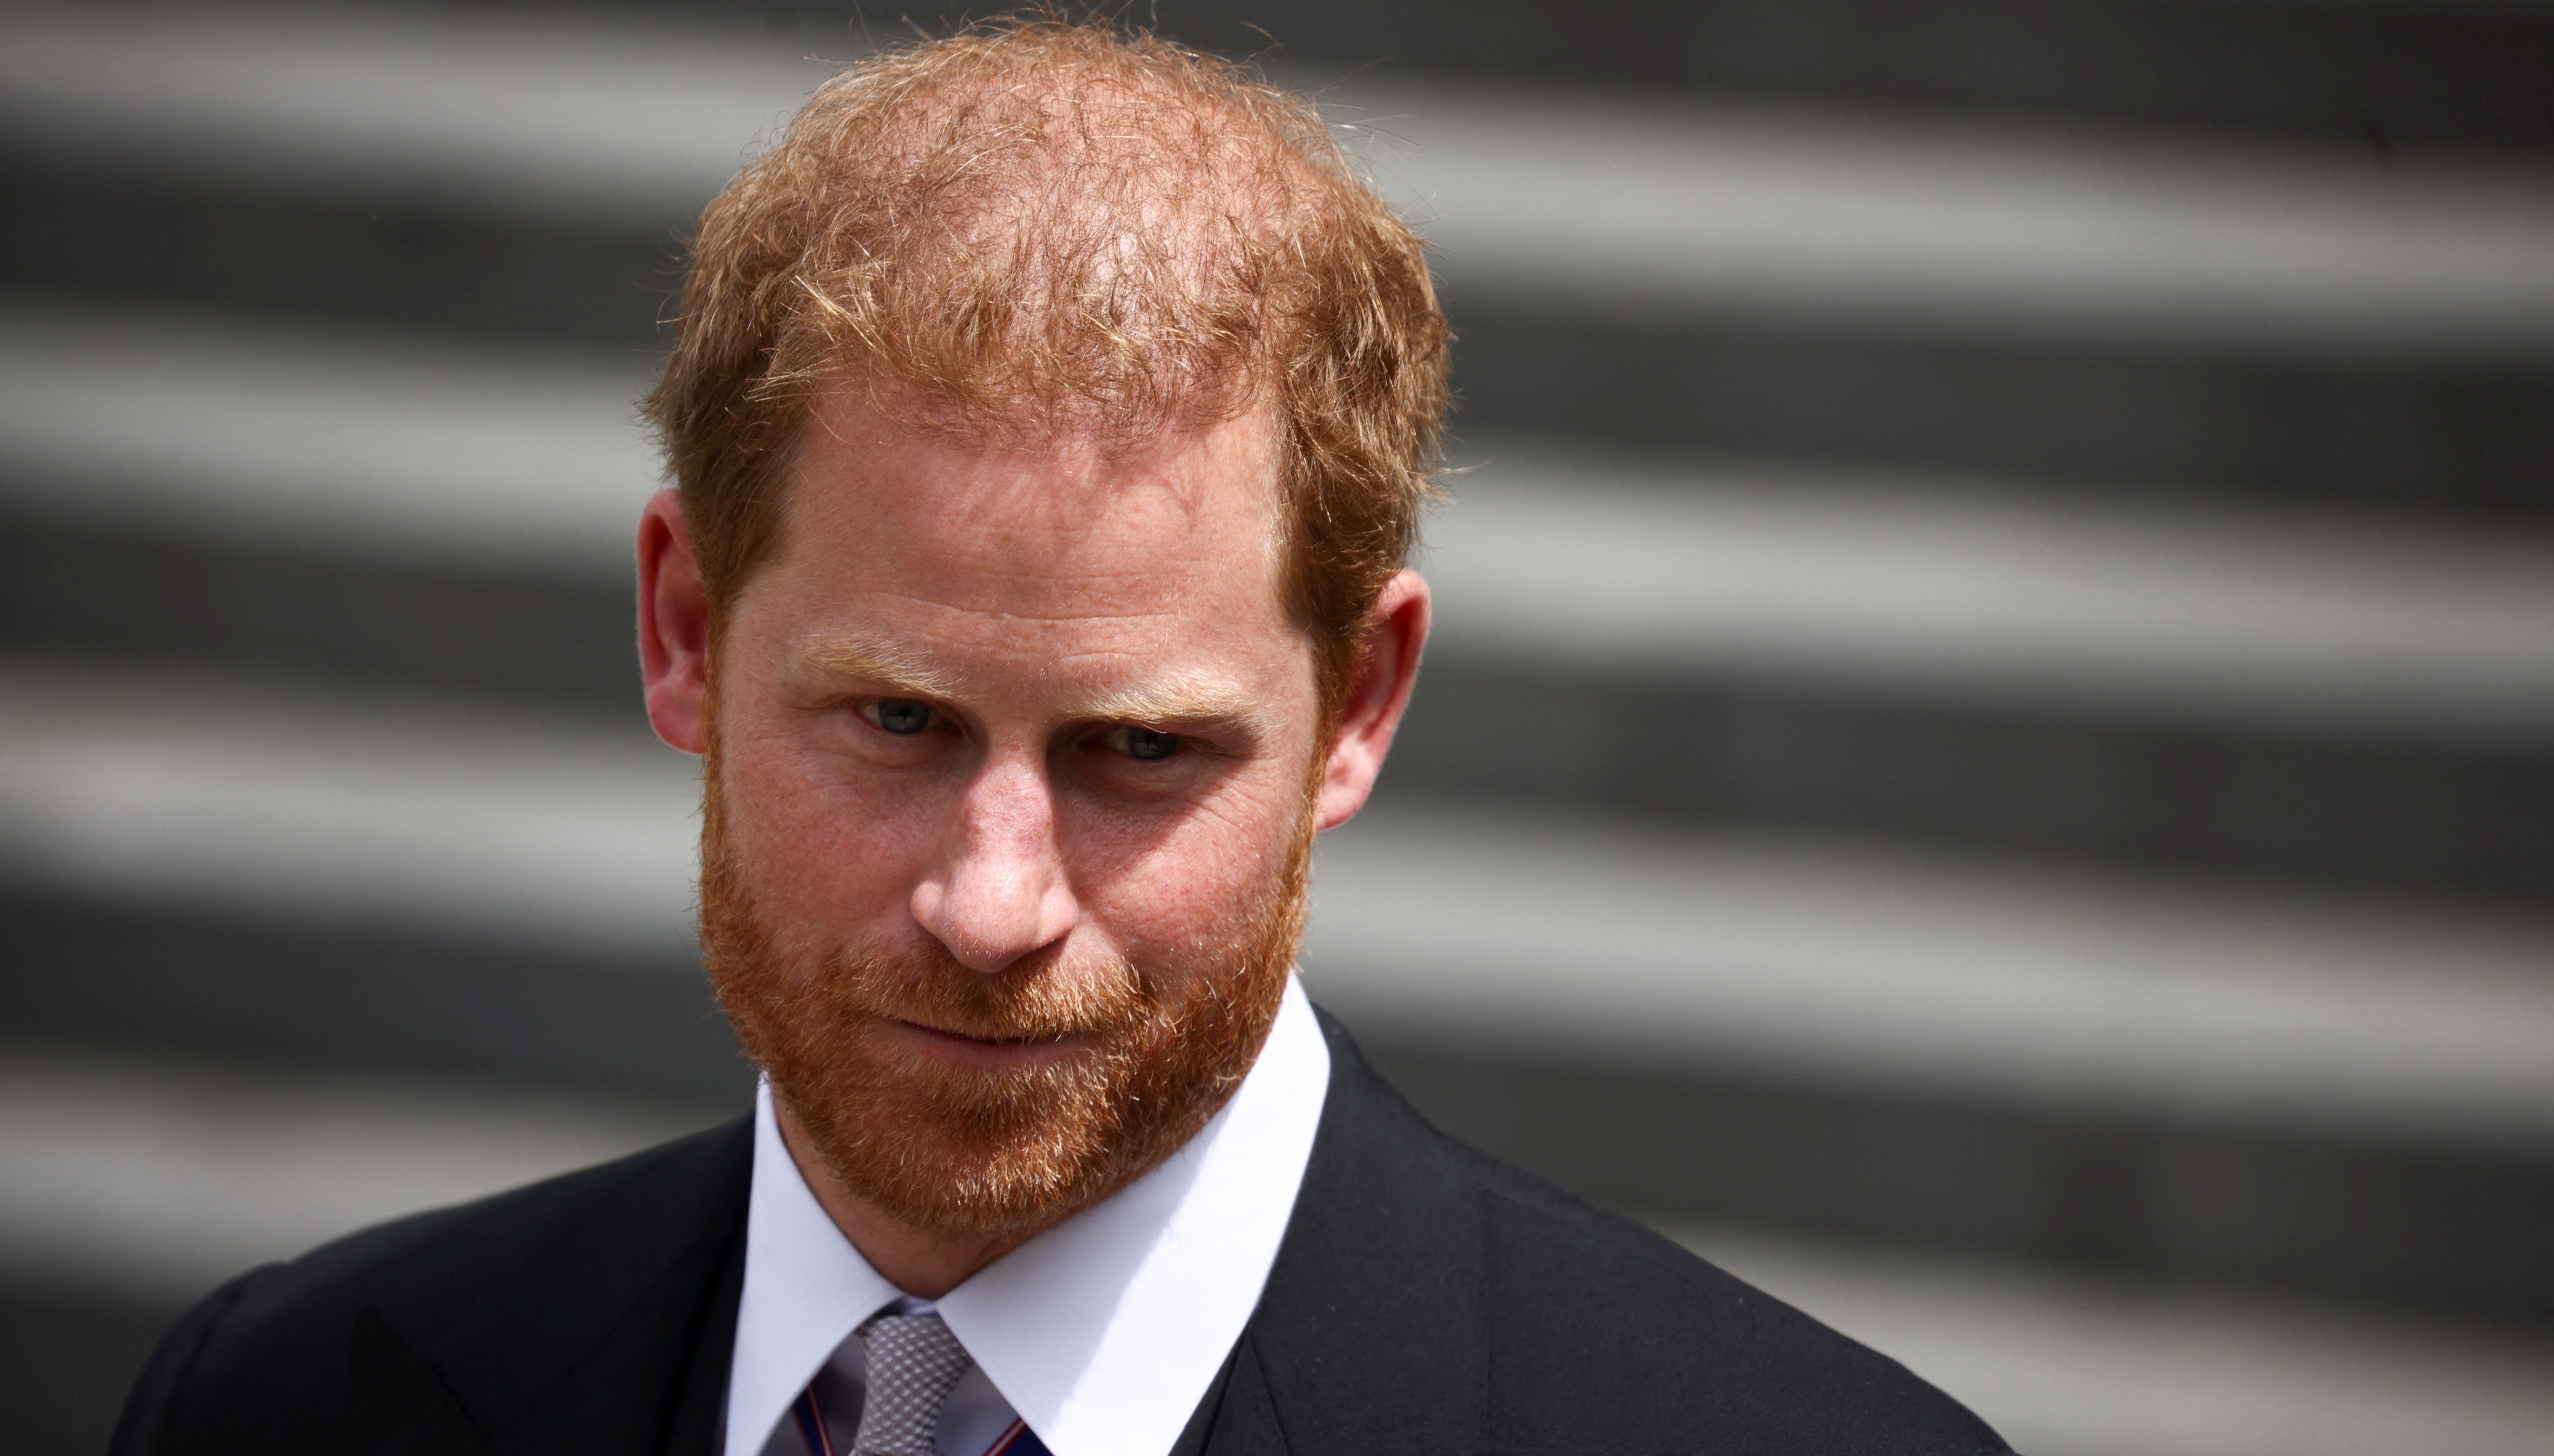 Prince Harry outlined his mental health challenges in a recent short film